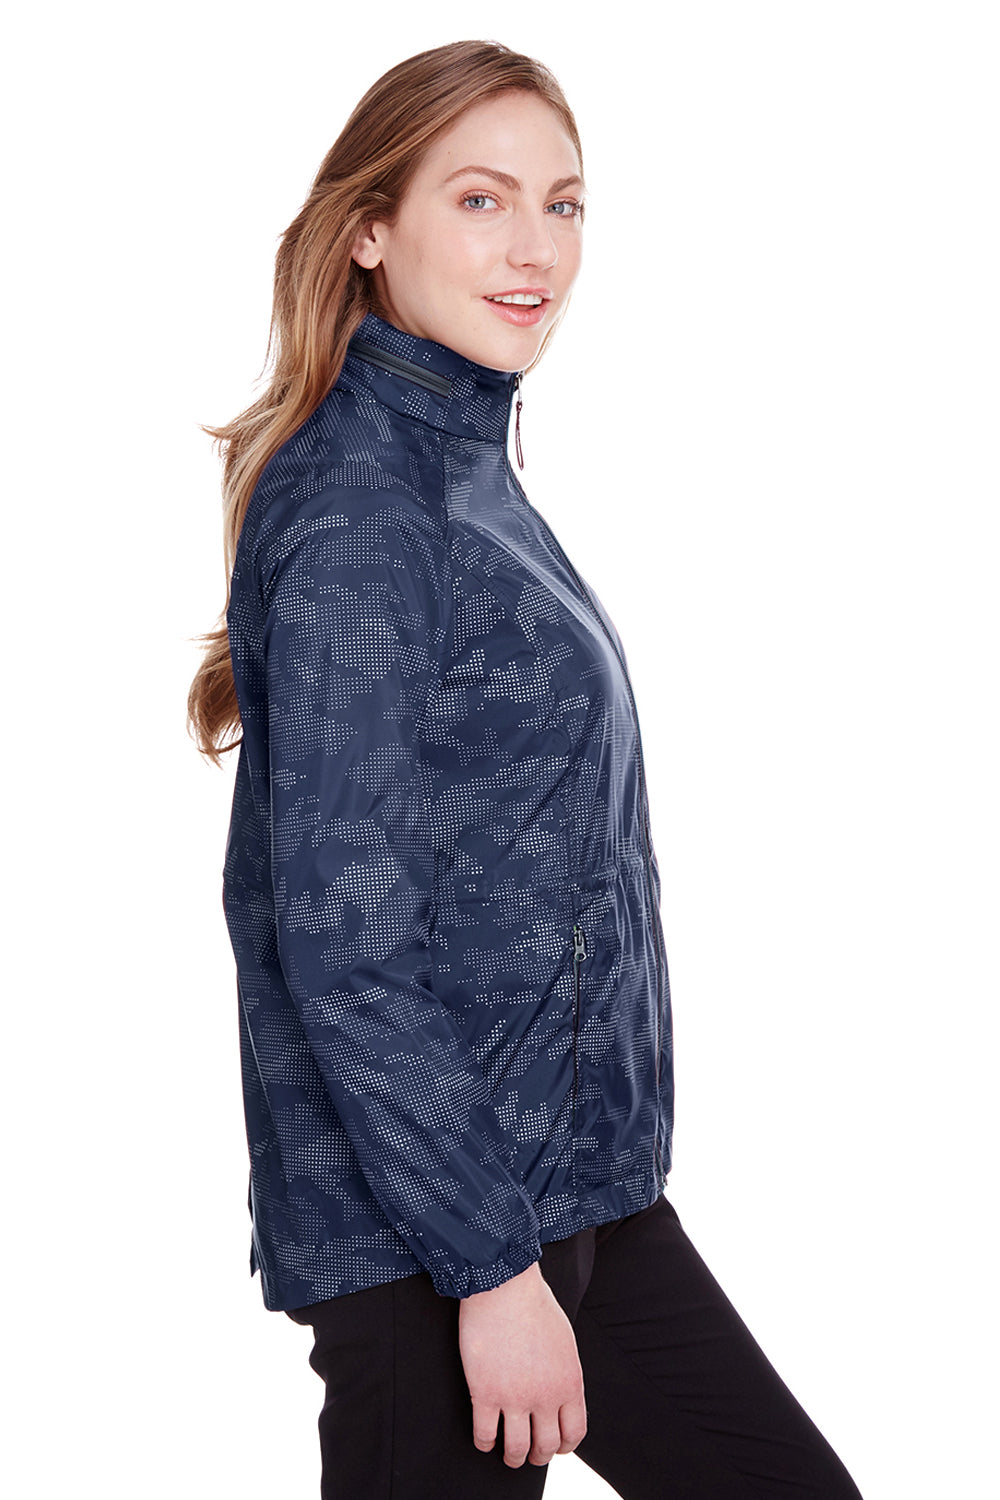 North End NE711W Womens Rotate Reflective Water Resistant Full Zip Hooded Jacket Navy Blue/Carbon Grey Side